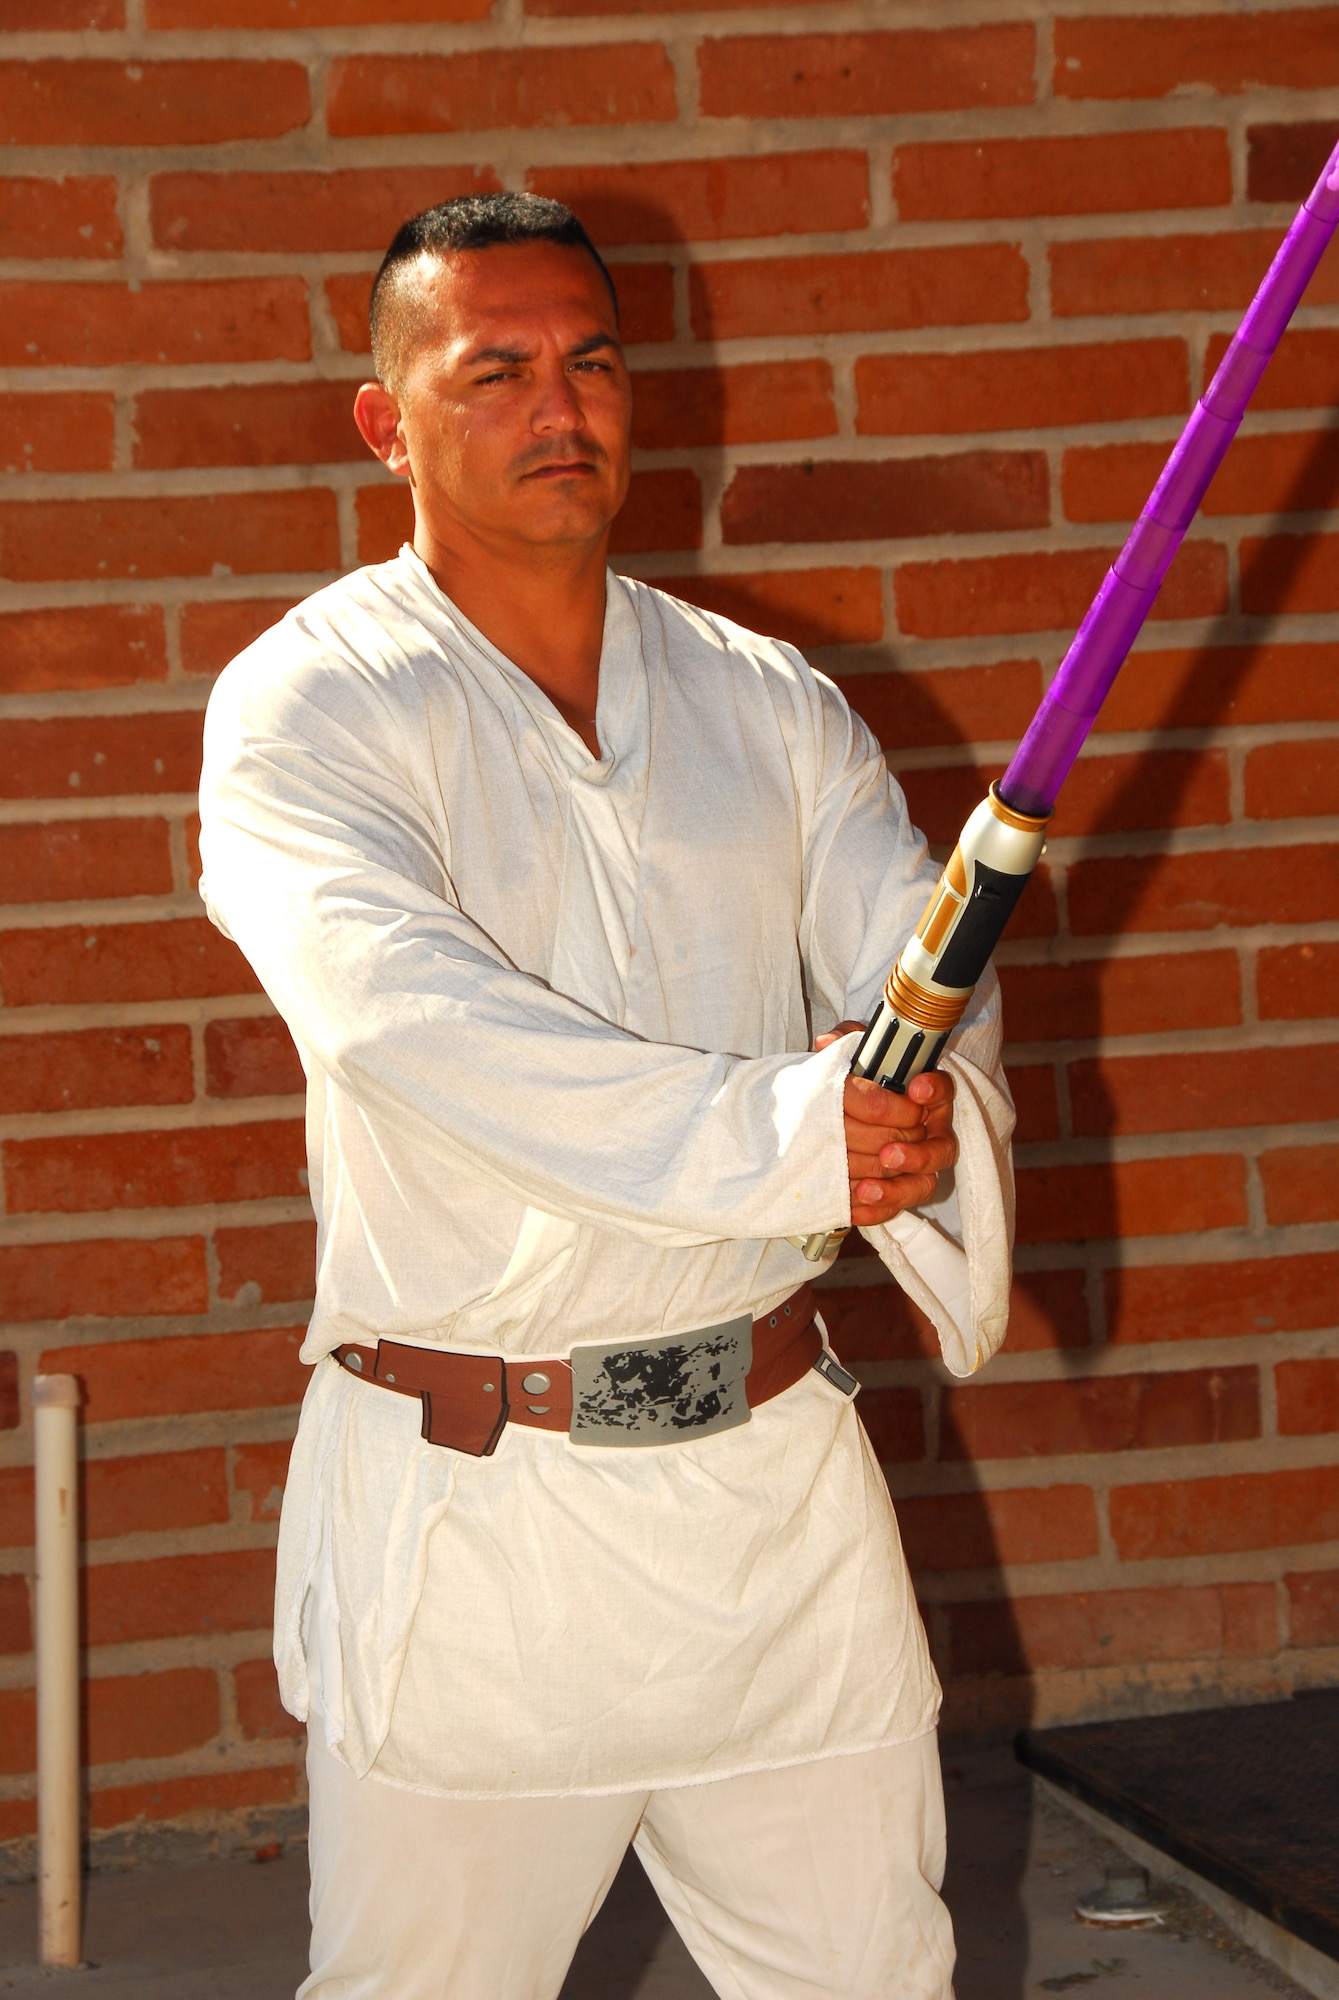 Staff Sgt. Anthony Felix shows off his Luke Skywalker costume at the 2009 Haunted Hangar at Tucson International Airport, Oct. 25. (Air National Guard photo by Master Sgt. David Neve)